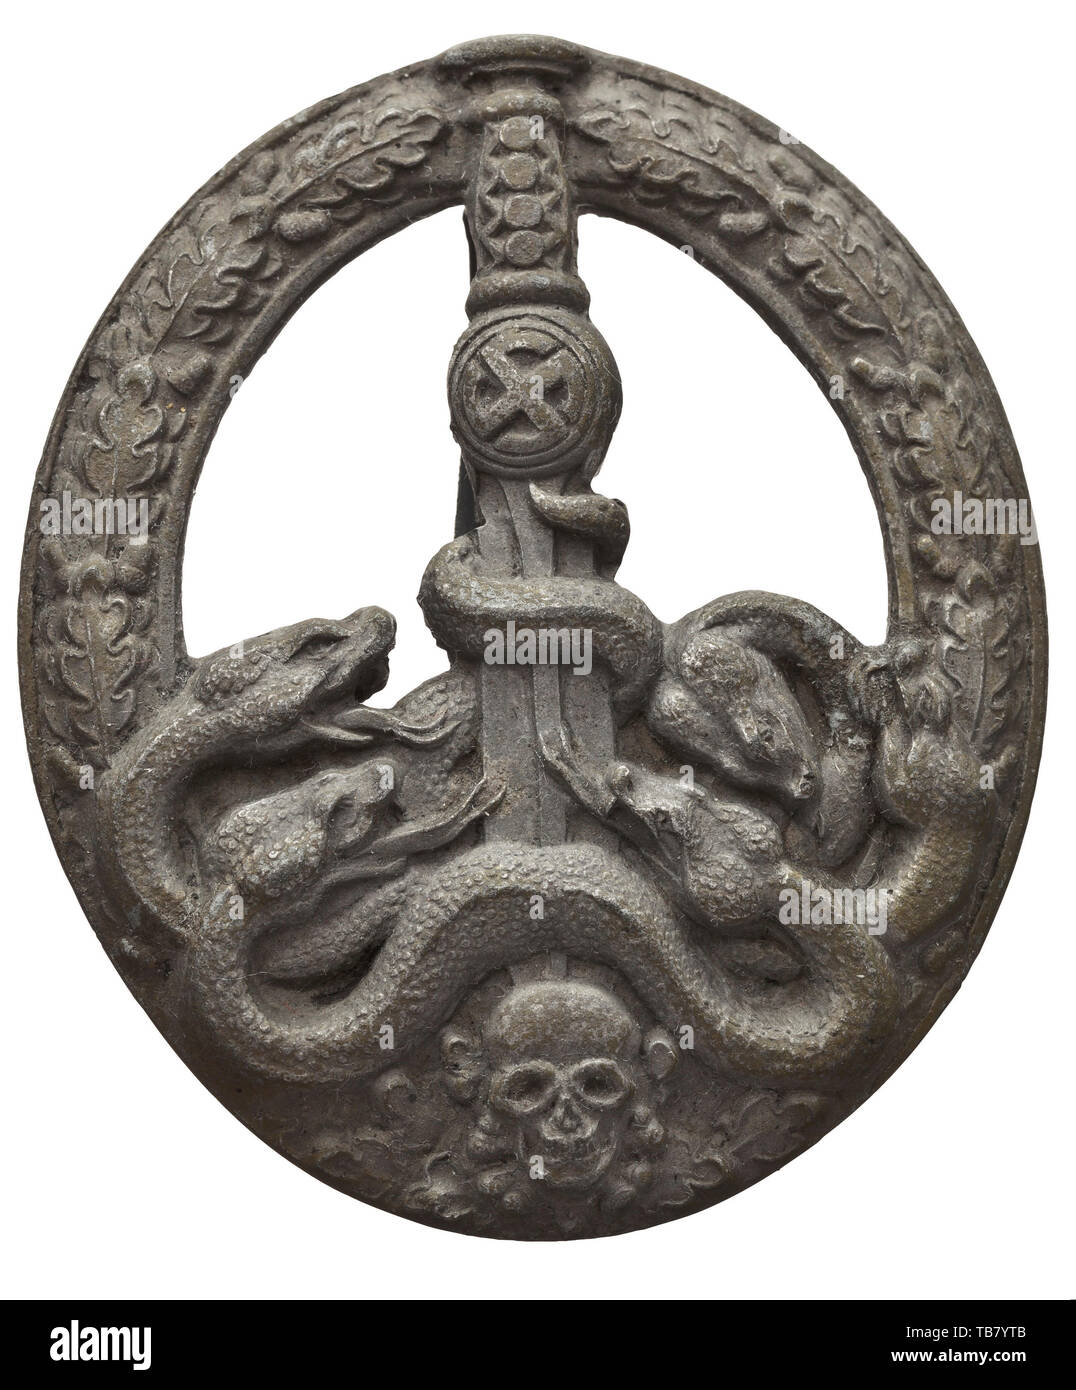 An Anti Partisan Badge - Juncker production in Bronze, Zinc semi-hollow issue by C.E. Juncker firm in Berlin, in the version without openwork between the serpents, on a magnetic (including the hook), wide pin system. This example in good condition, with traces of the bronzing. Width 49.5 mm. Weight 34.7 g. historic, historical 20th century, Editorial-Use-Only Stock Photo